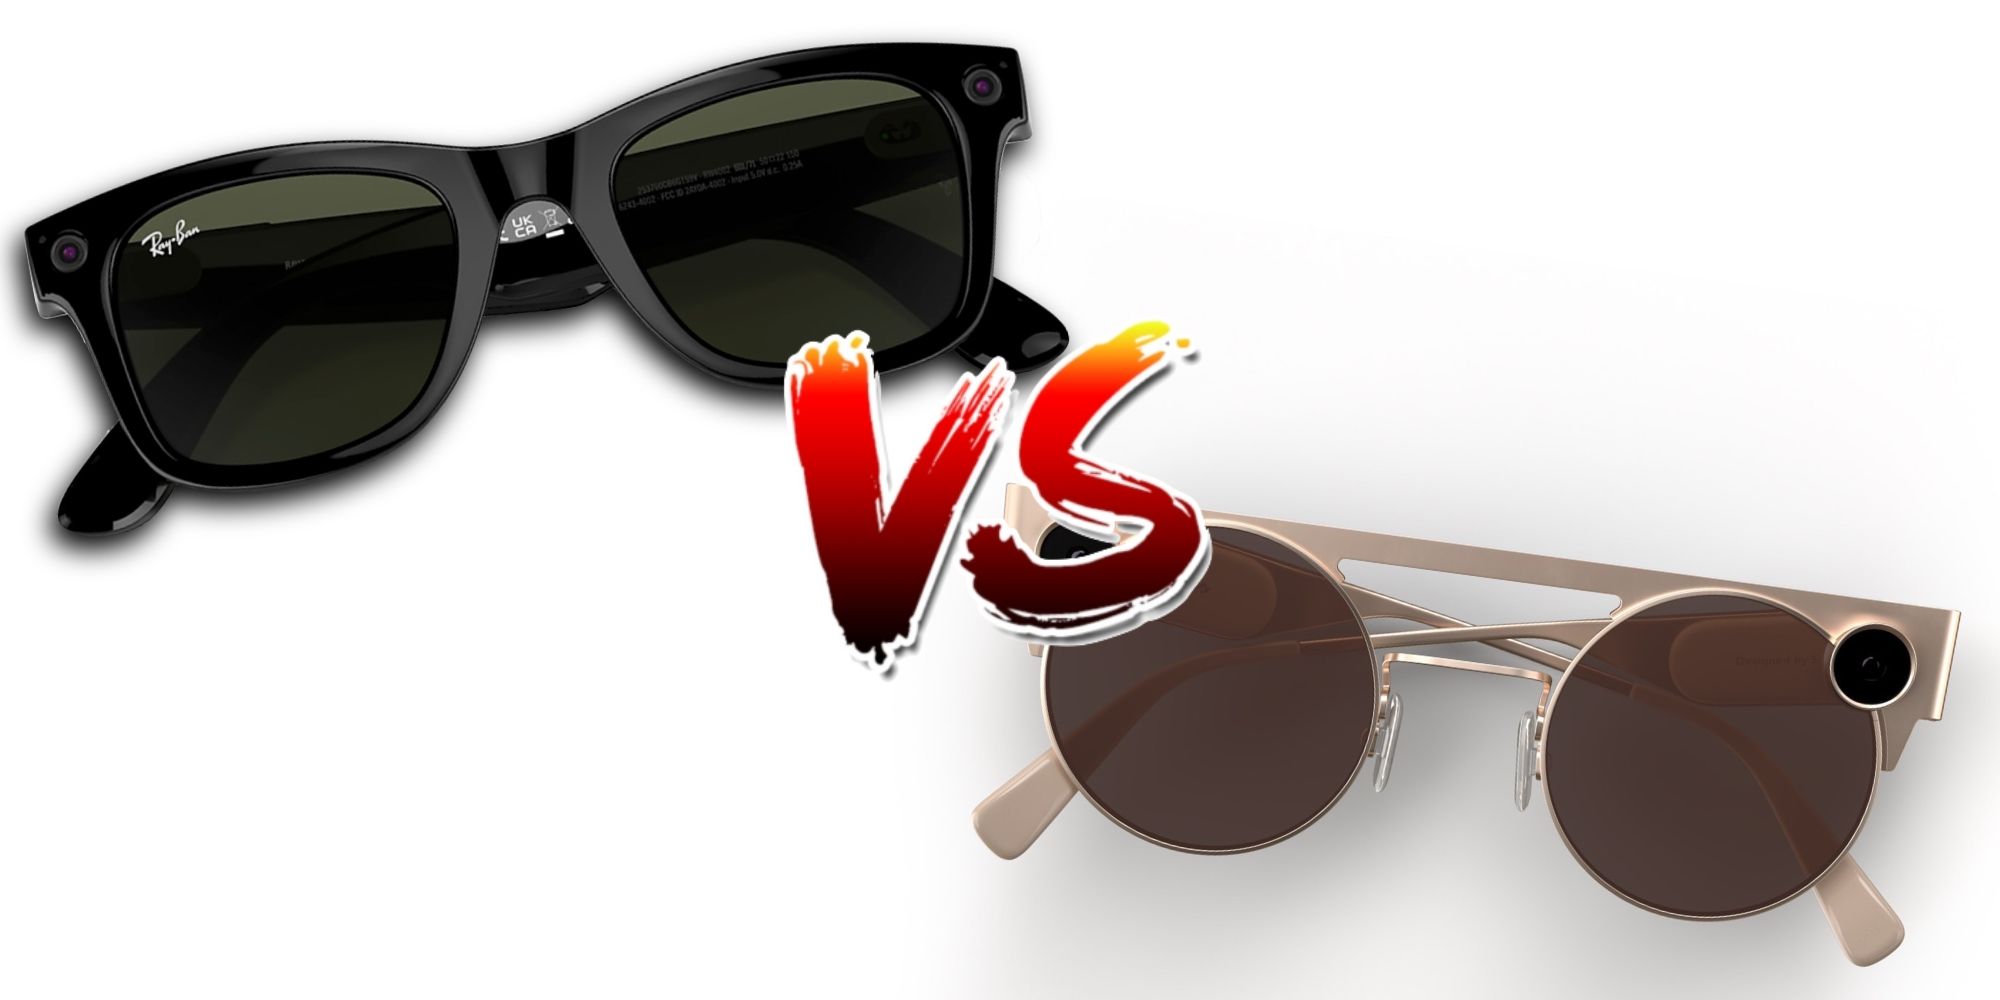 RayBan Stories Vs Spectacles 3 Are Facebook Or Snapchats Glasses Best